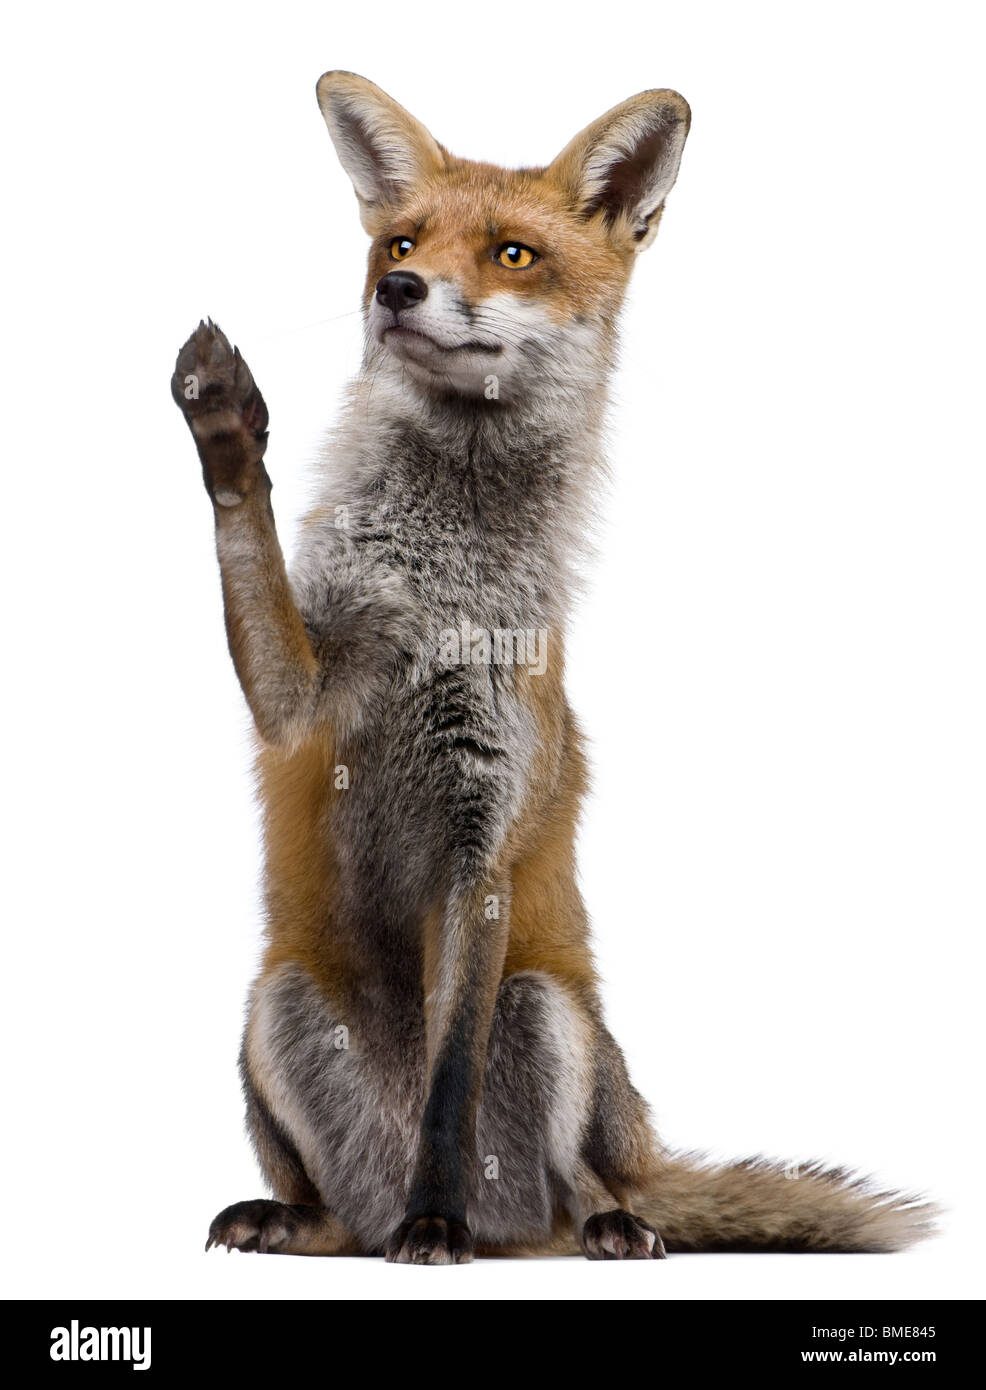 Red Fox, 1 year old, sitting with paw raised in front of white background Stock Photo